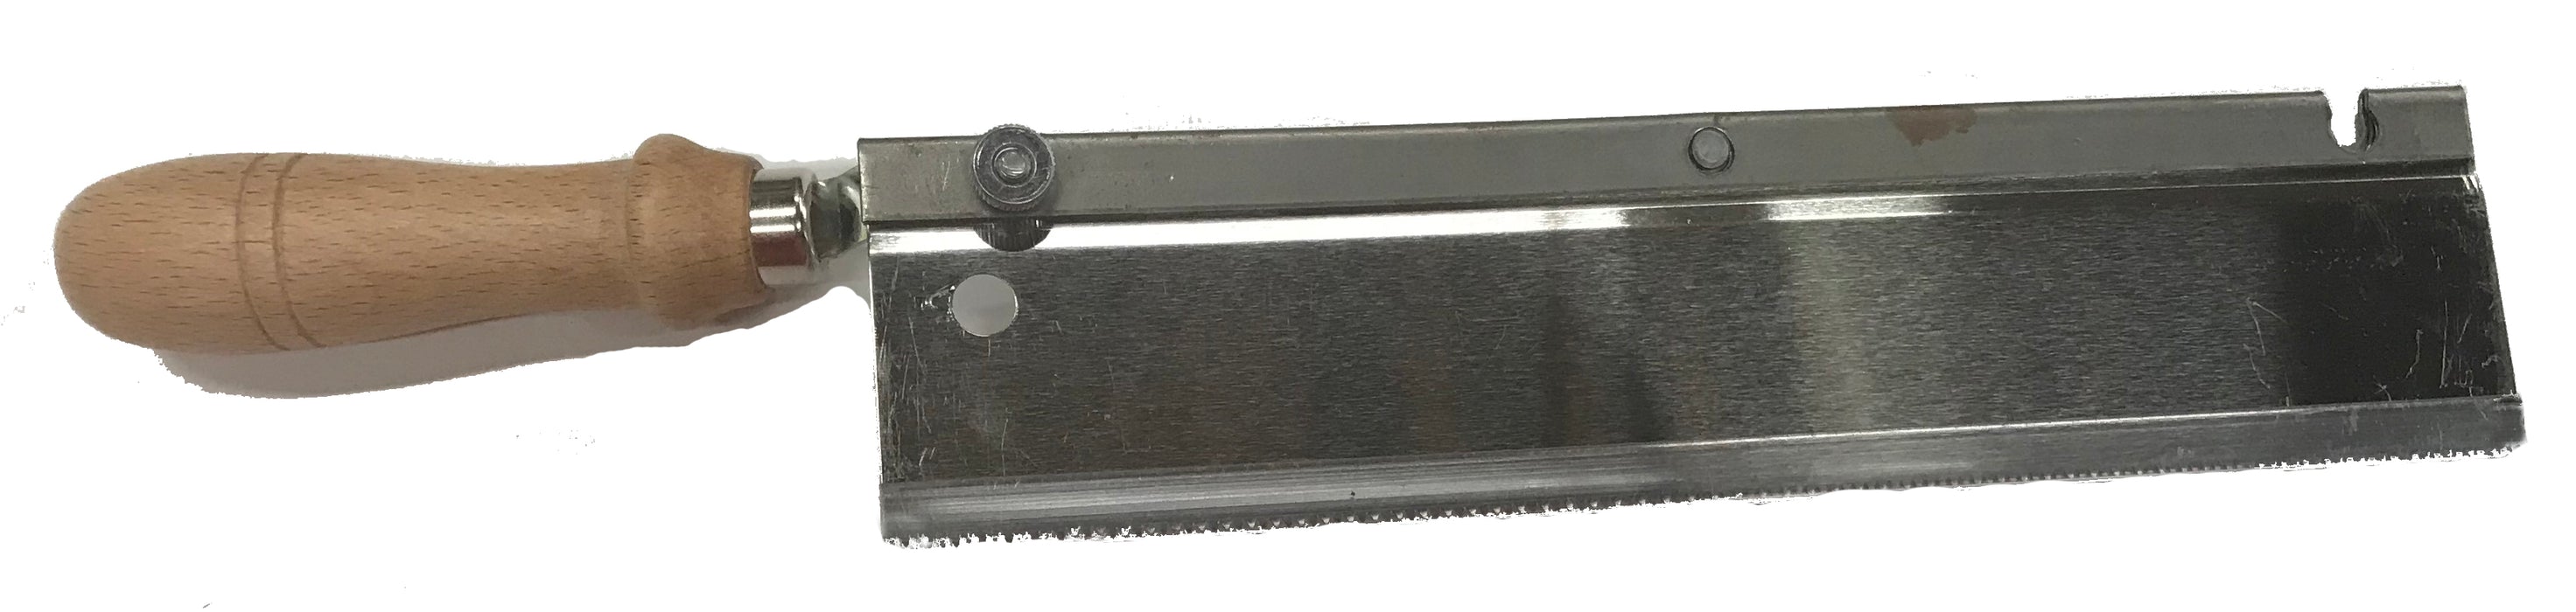 German Hand Saw - Dovetail Saw - Reversible - 20 tpi - 10" long - Baier brand.